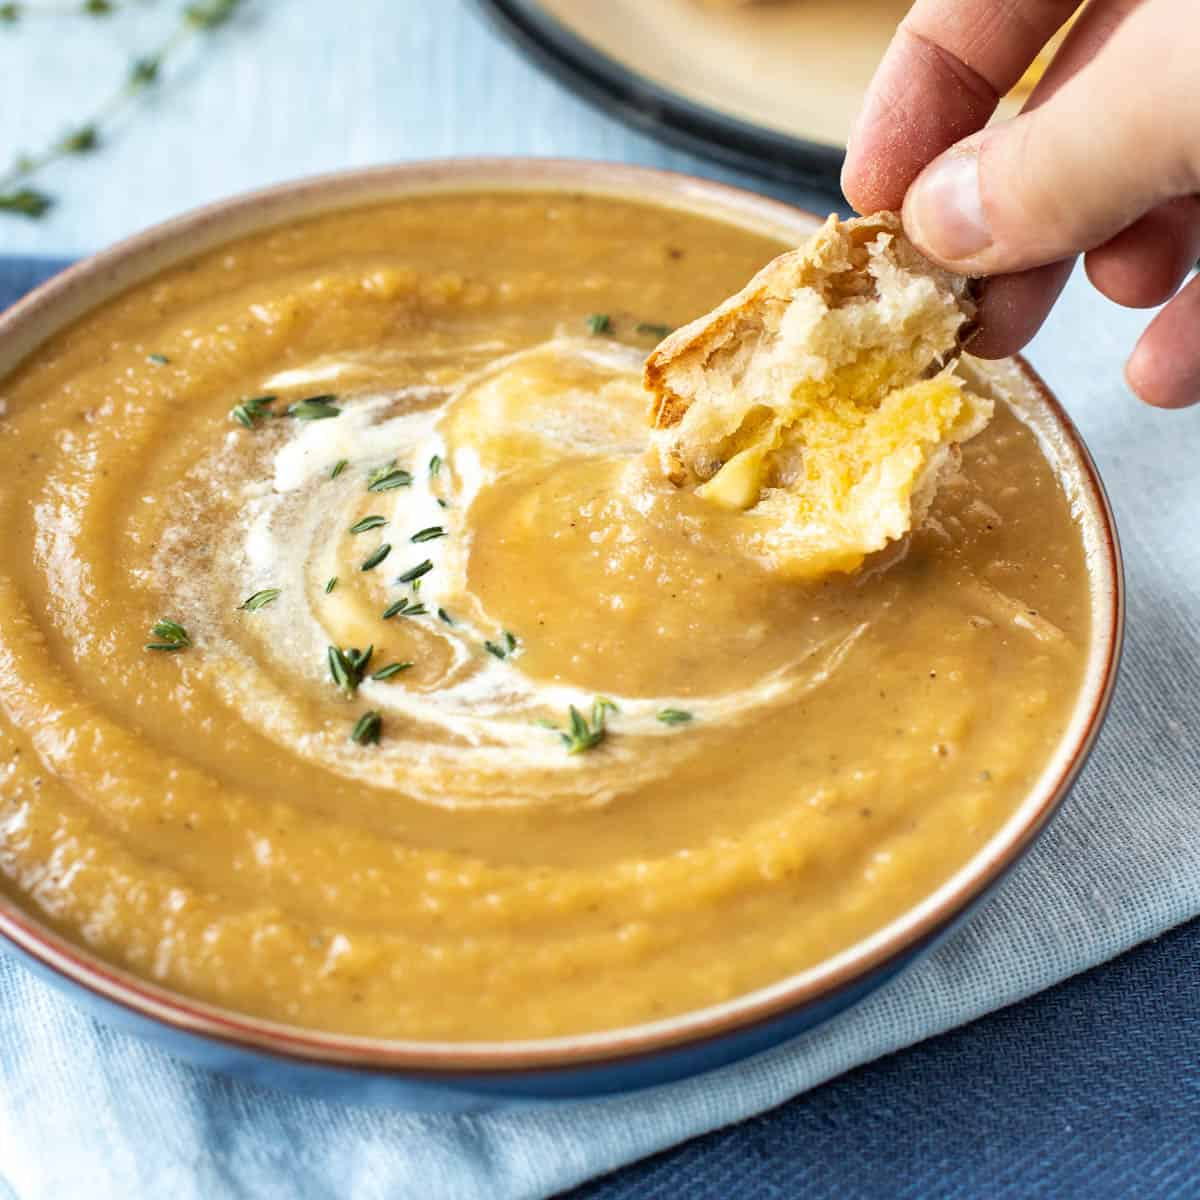 A hand holding a piece of bread, dipping it in creamy roasted parsnip soup.